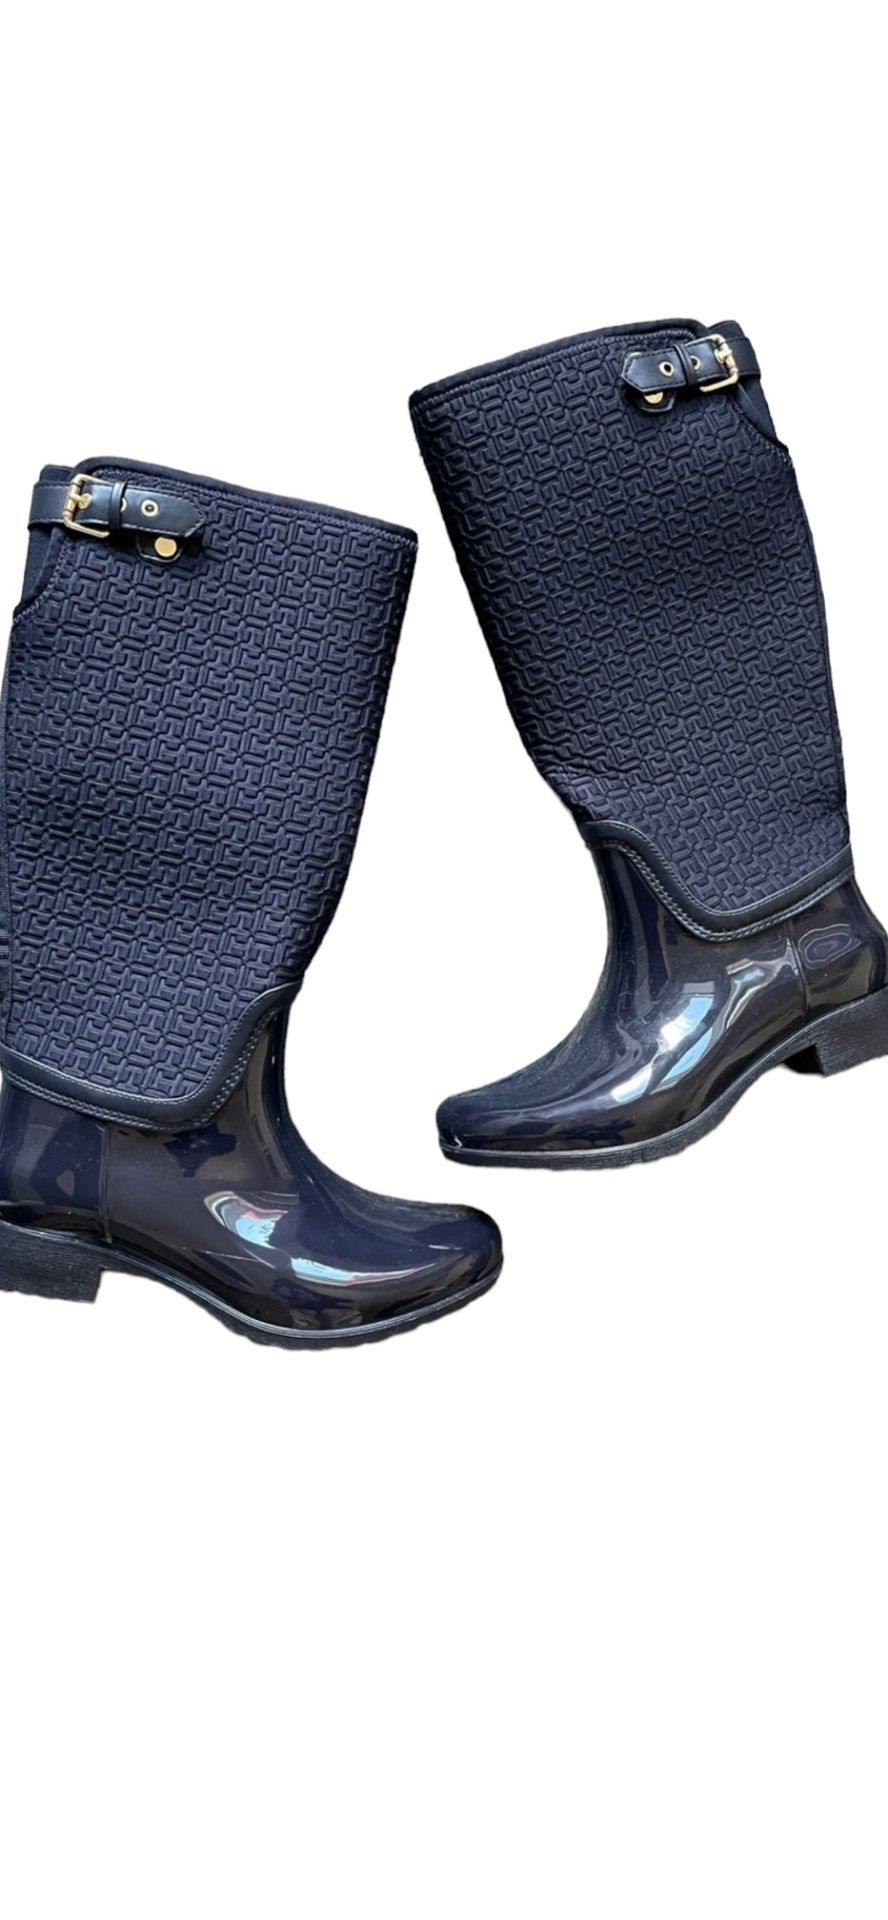 TOMMY HILFIGER Women 8 FORT TEXTURED EQUESTRIAN BOOTS in Black Rain Shoes Elevate your shoe game with these stylish TOMMY HILFIGER FORT TEXTURED EQUES